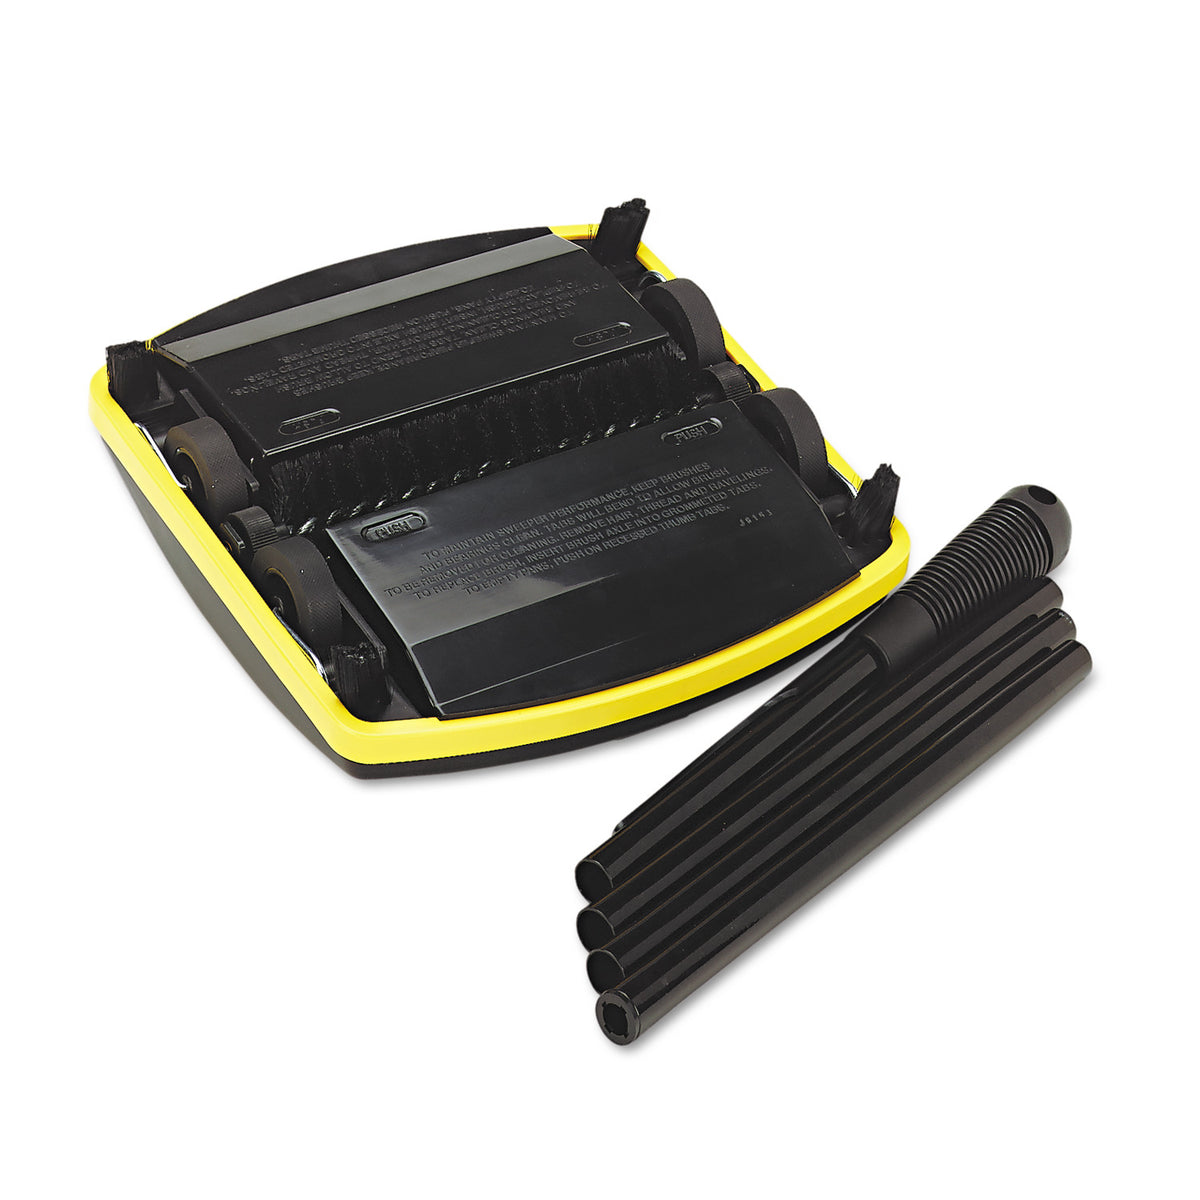 buy carpet sweepers at cheap rate in bulk. wholesale & retail appliance maintenance tools store.